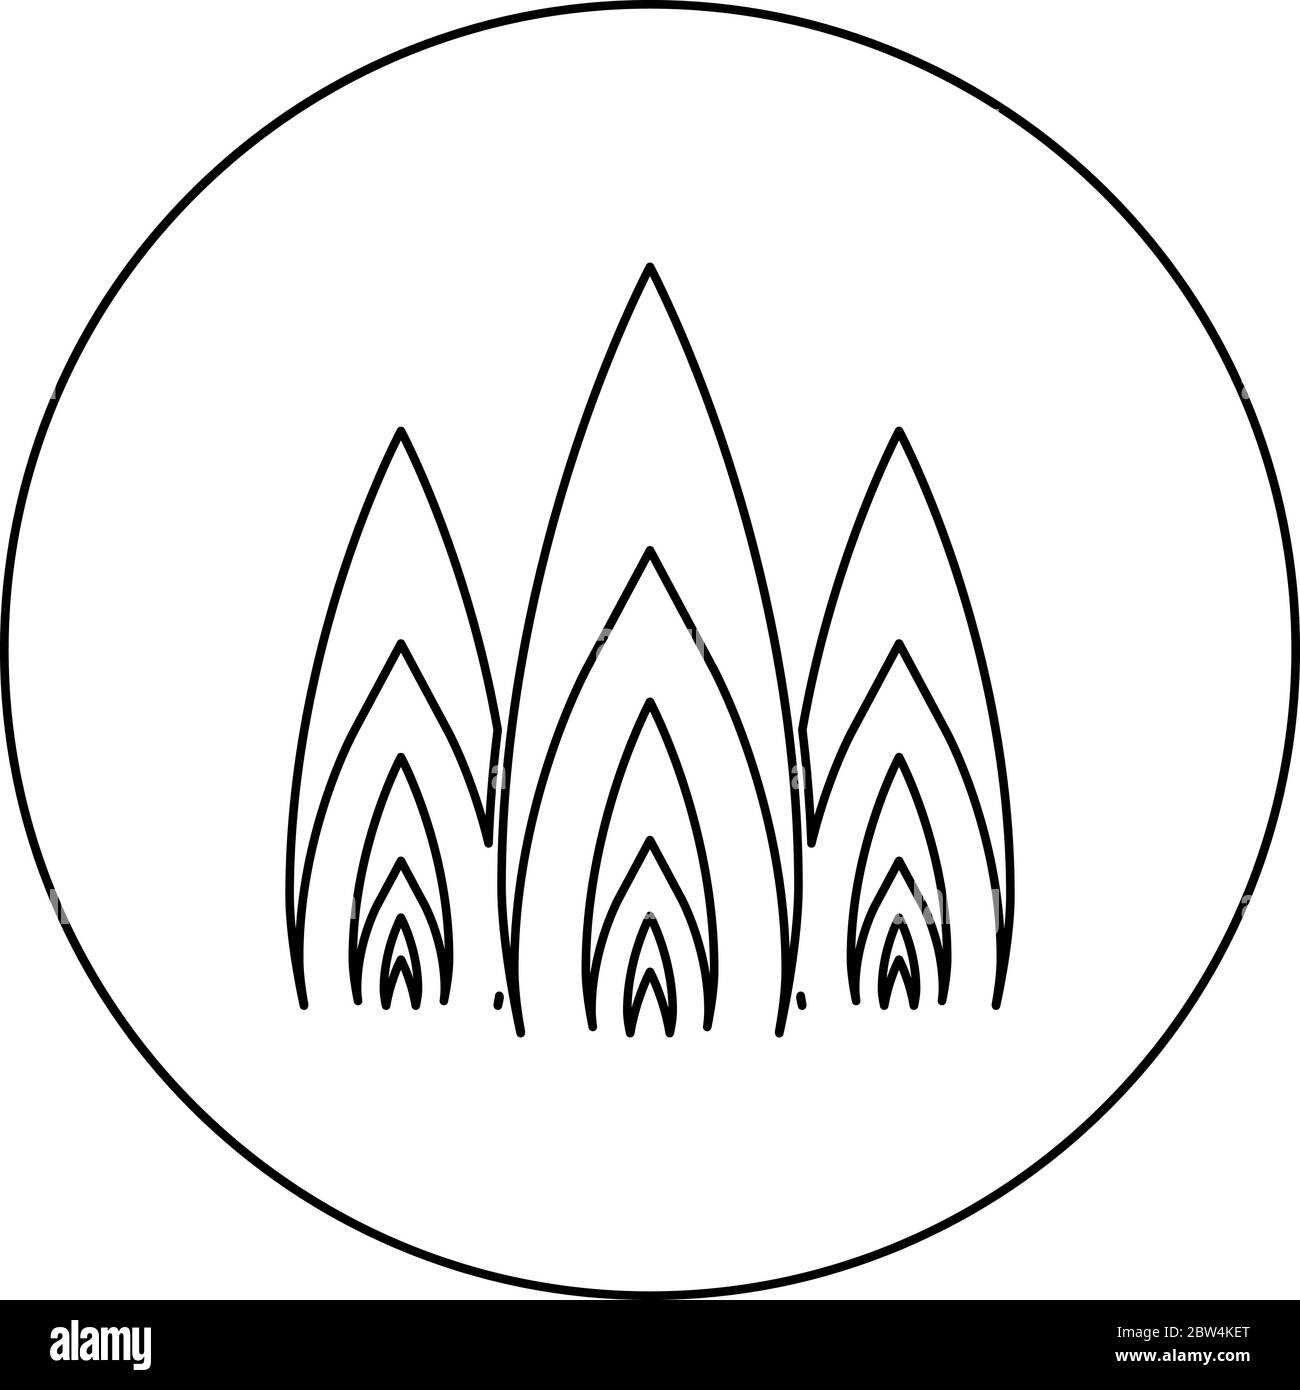 Three flame fire Burn bonfire 3 tongues icon in circle round outline black color vector illustration flat style simple image Stock Vector